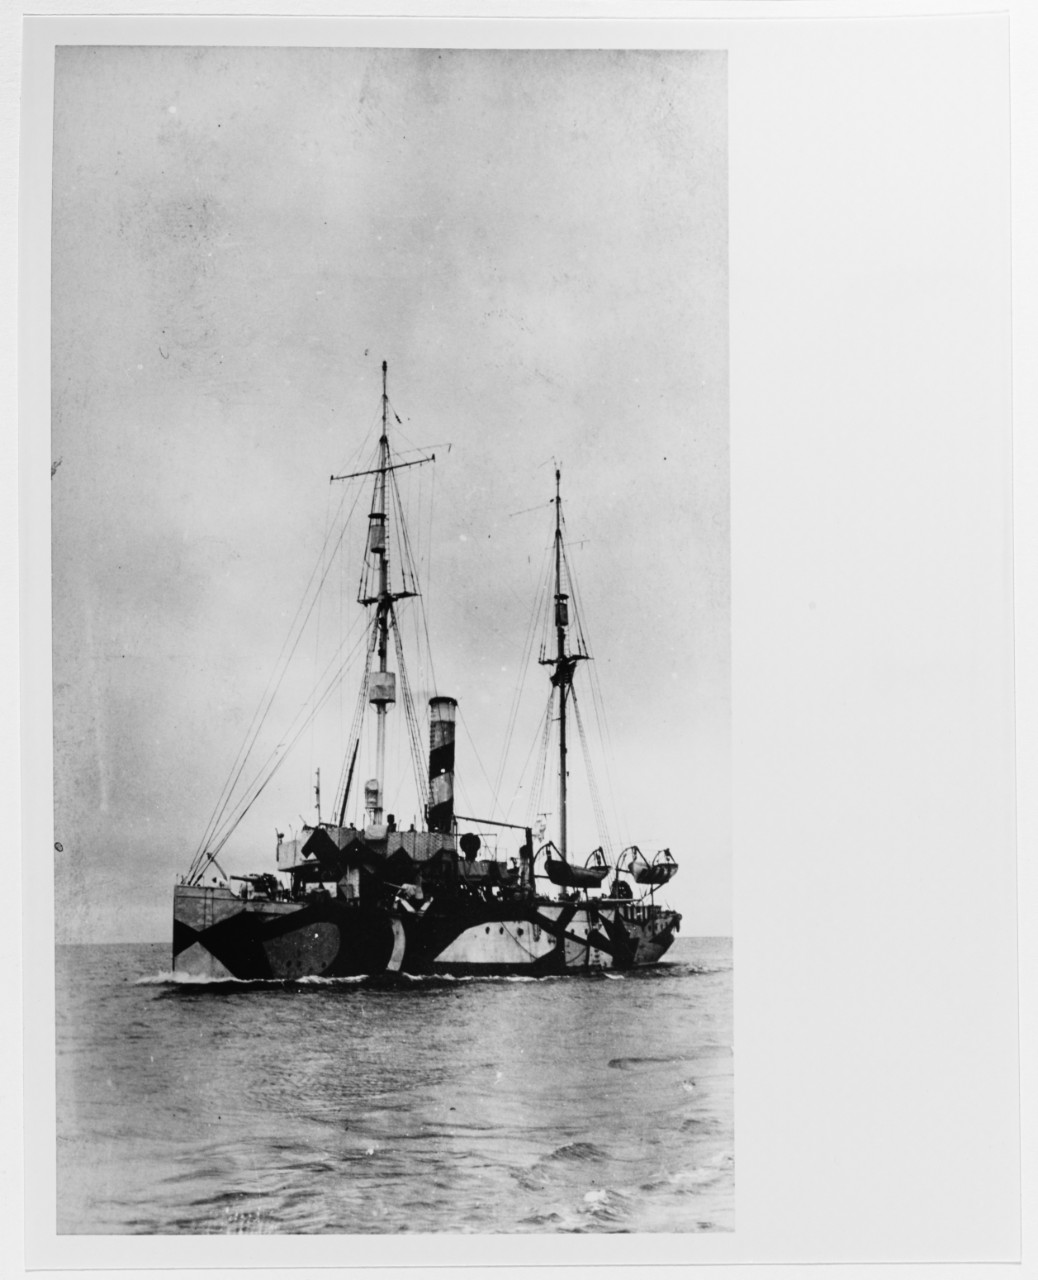 The Navy gunboat USS Marietta, which Hamlet commanded in World War I during the famed rescue of the navy minesweeper USS James. (Naval History and Heritage Command)